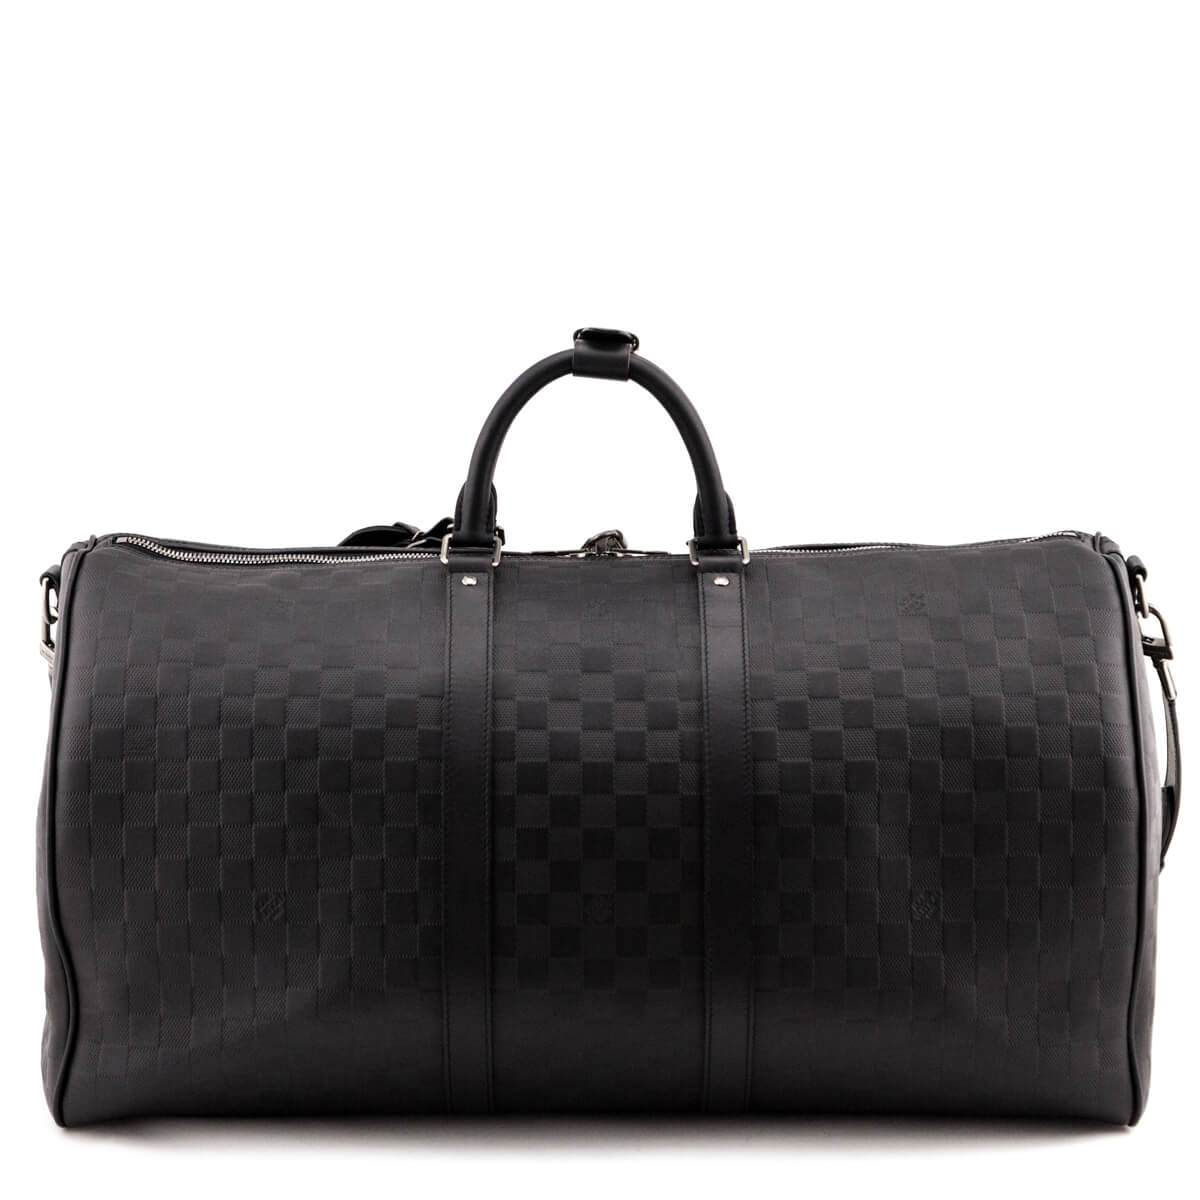 Louis Vuitton Onyx Damier Infini Keepall Bandouliere 55 - LV for Less